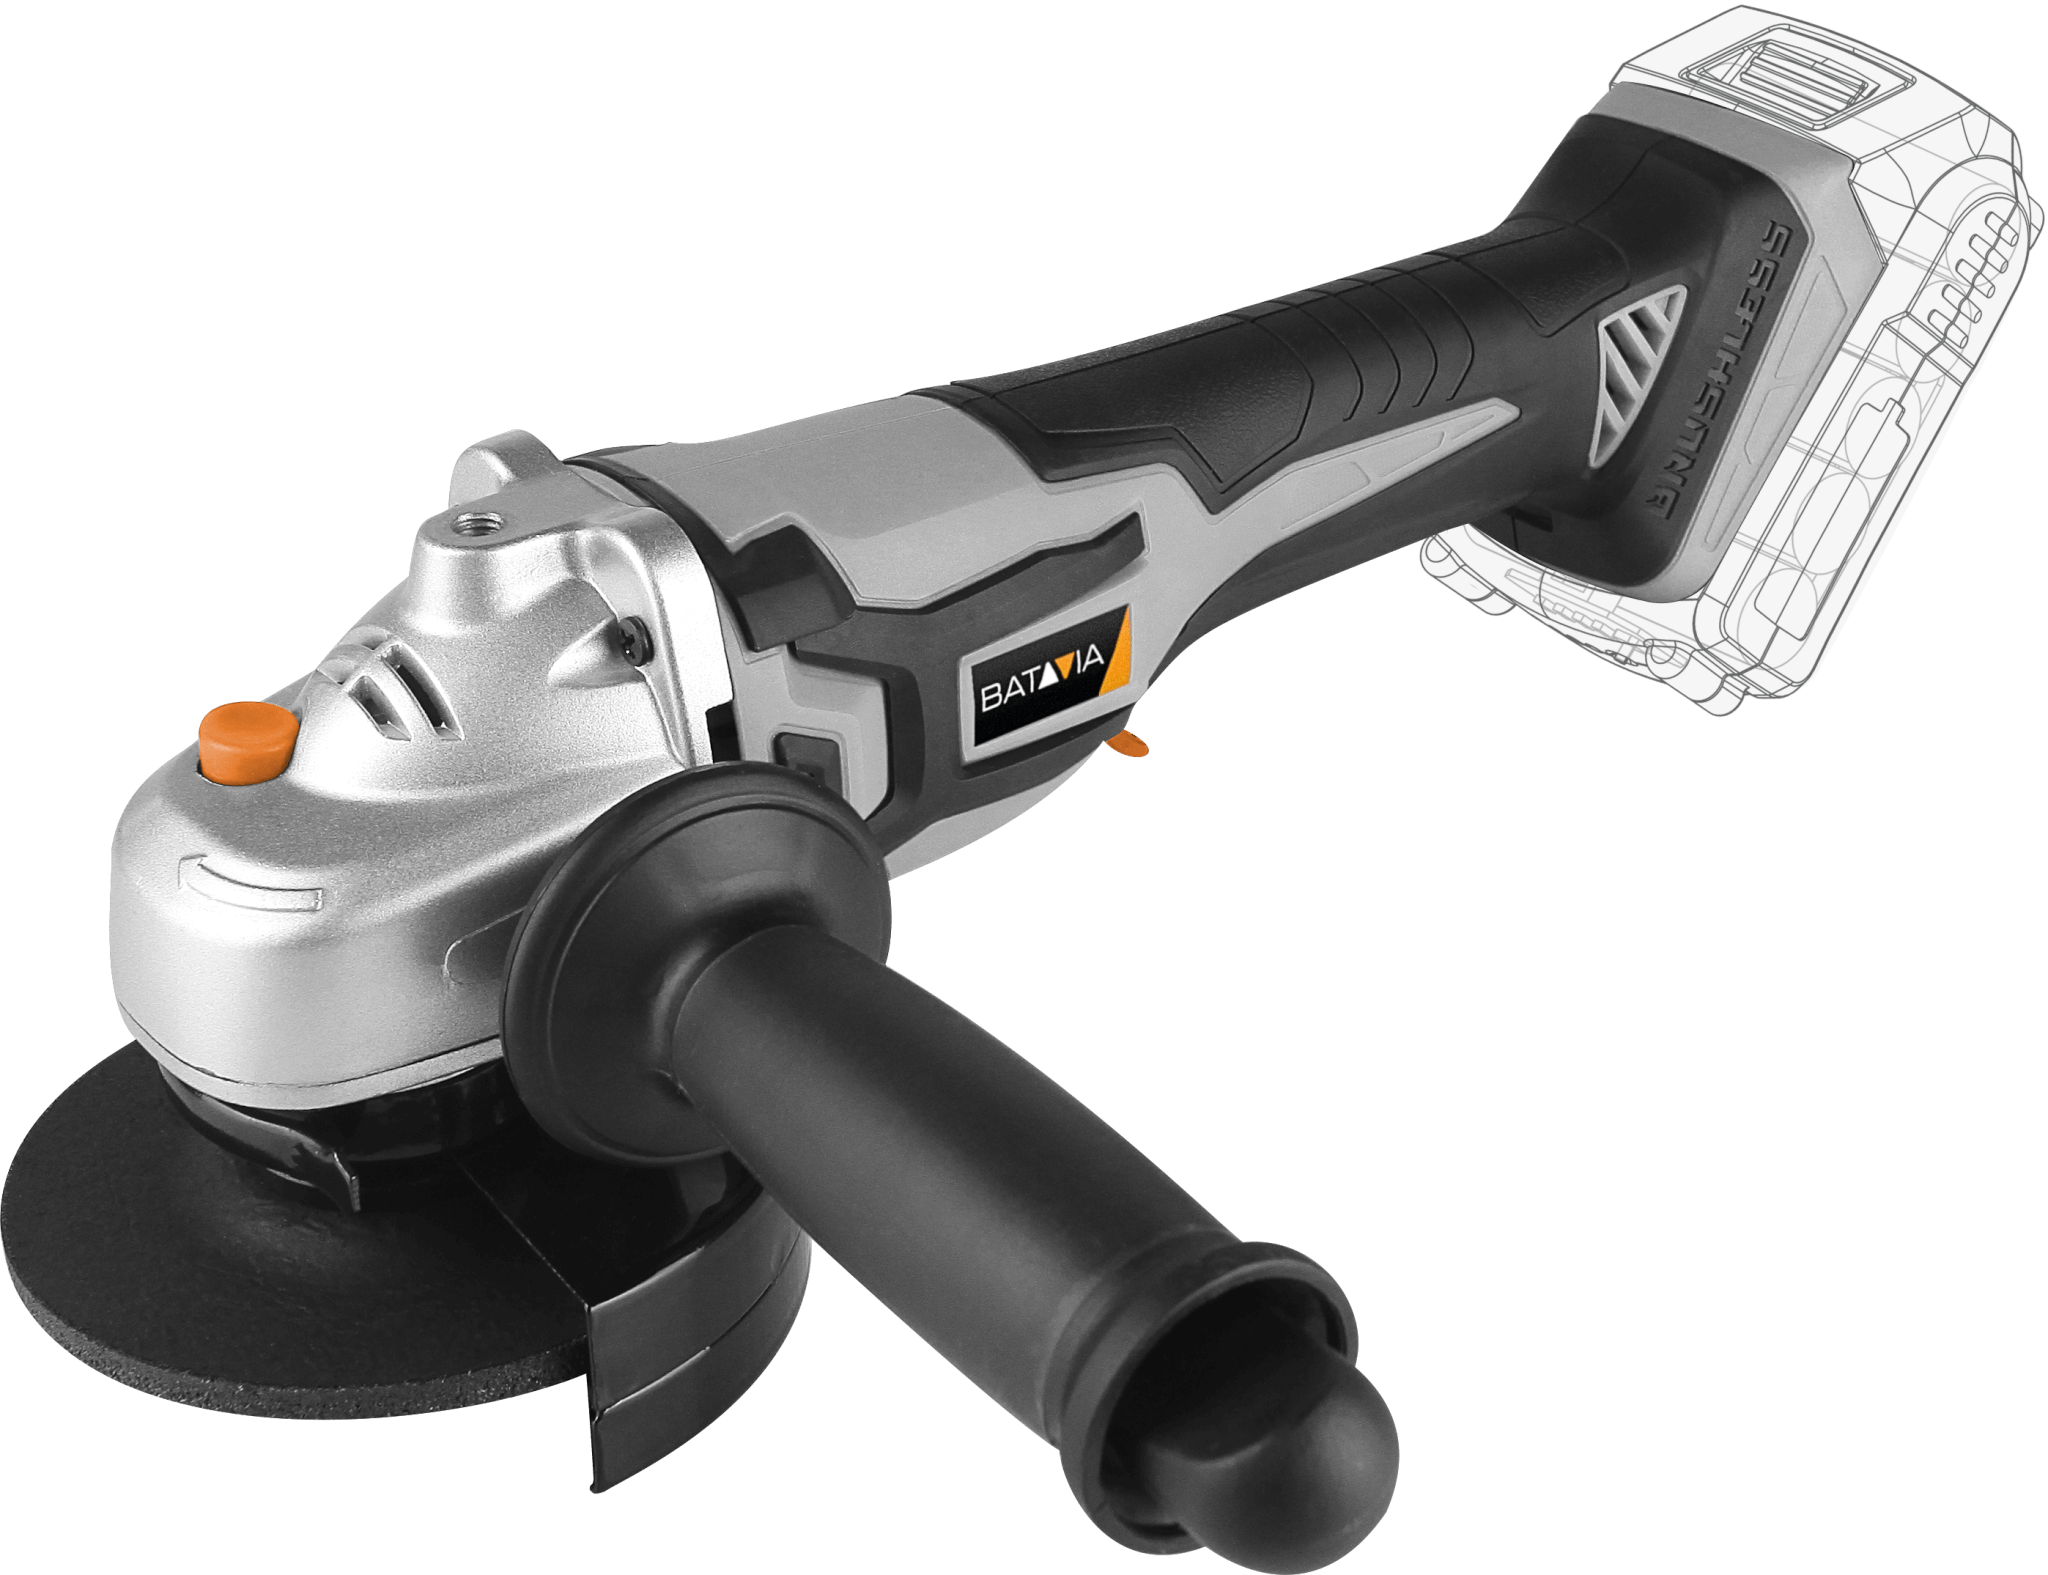 Brushless Angle Grinder | Batavia | Maxxpack collection